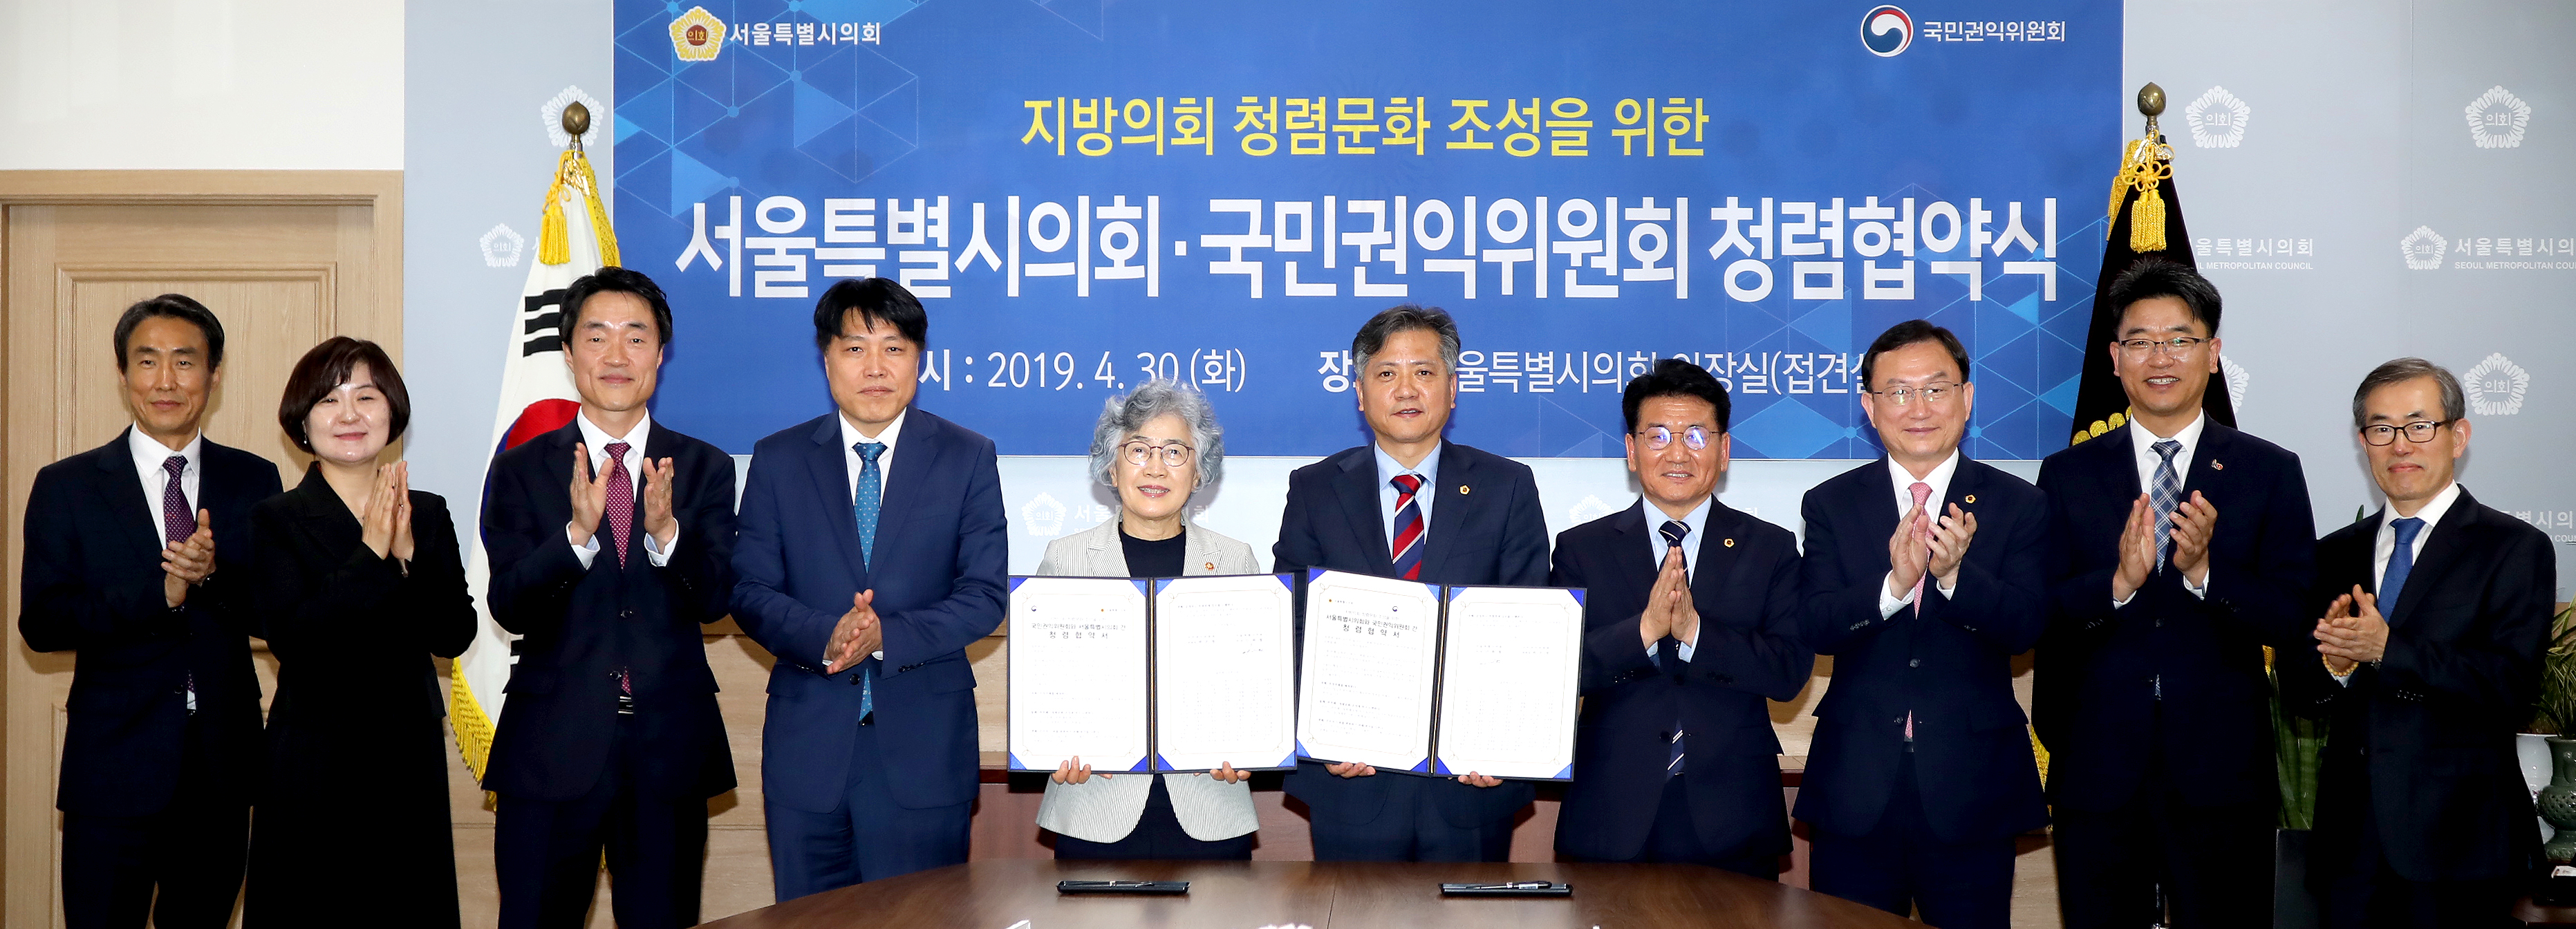 ACRC and the Seoul Metropolitan Council signed a Memorandum of Understanding to create integrity culture for local councils